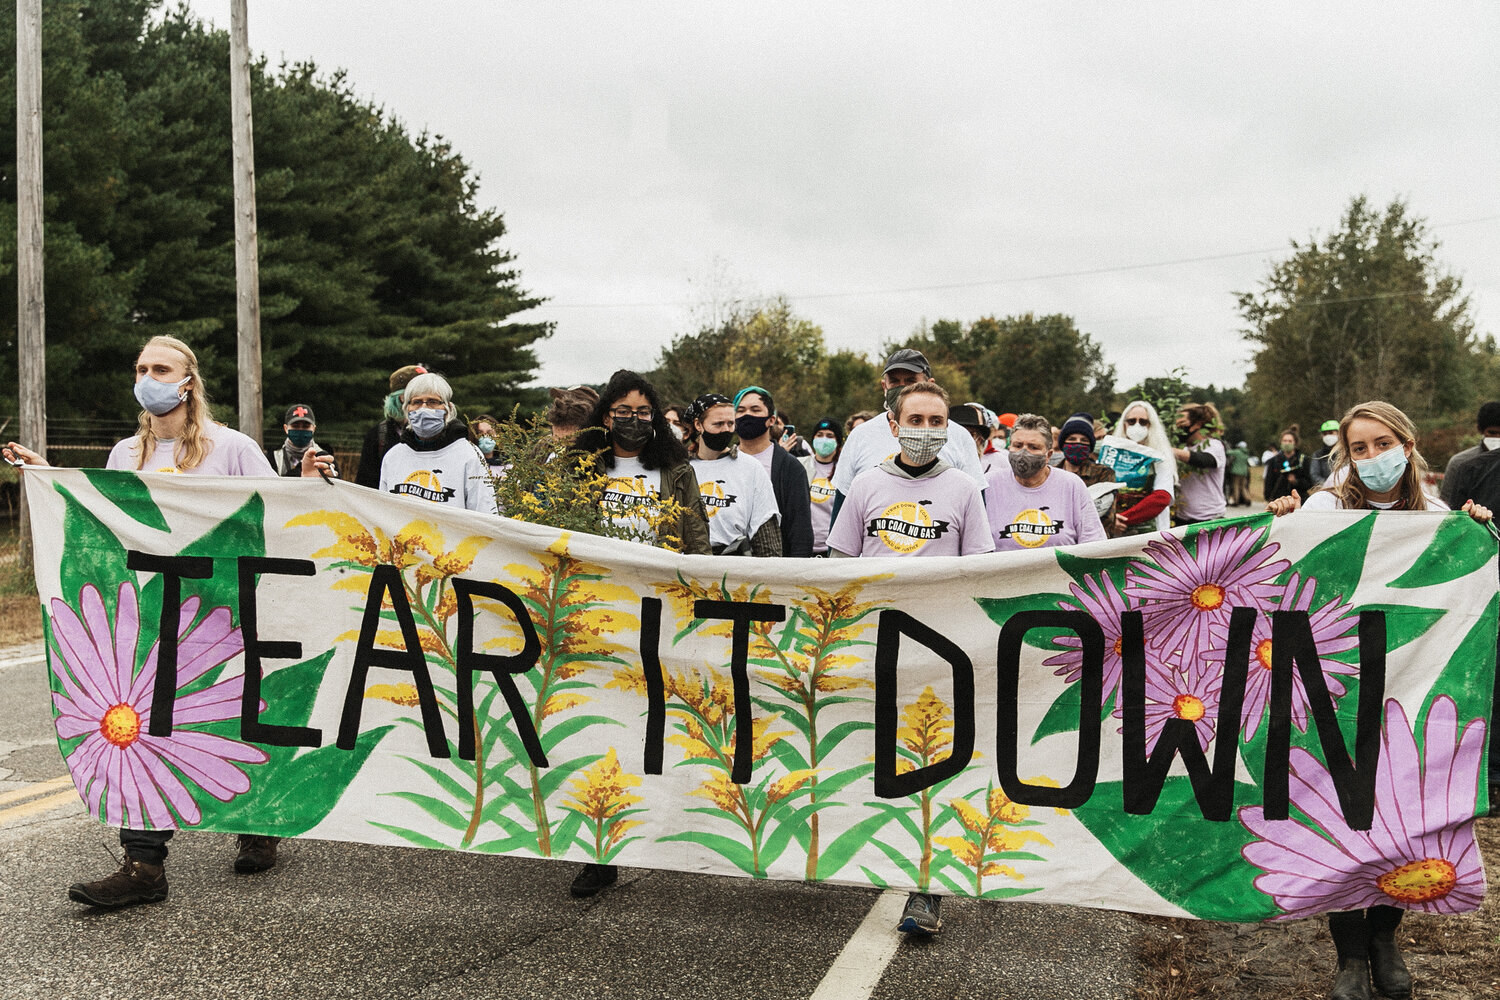 image of a crowd of people in t shirts that say "no coal no gas" walking behind a big banner that says "Tear it down." The people are carrying plants and buckets of soil